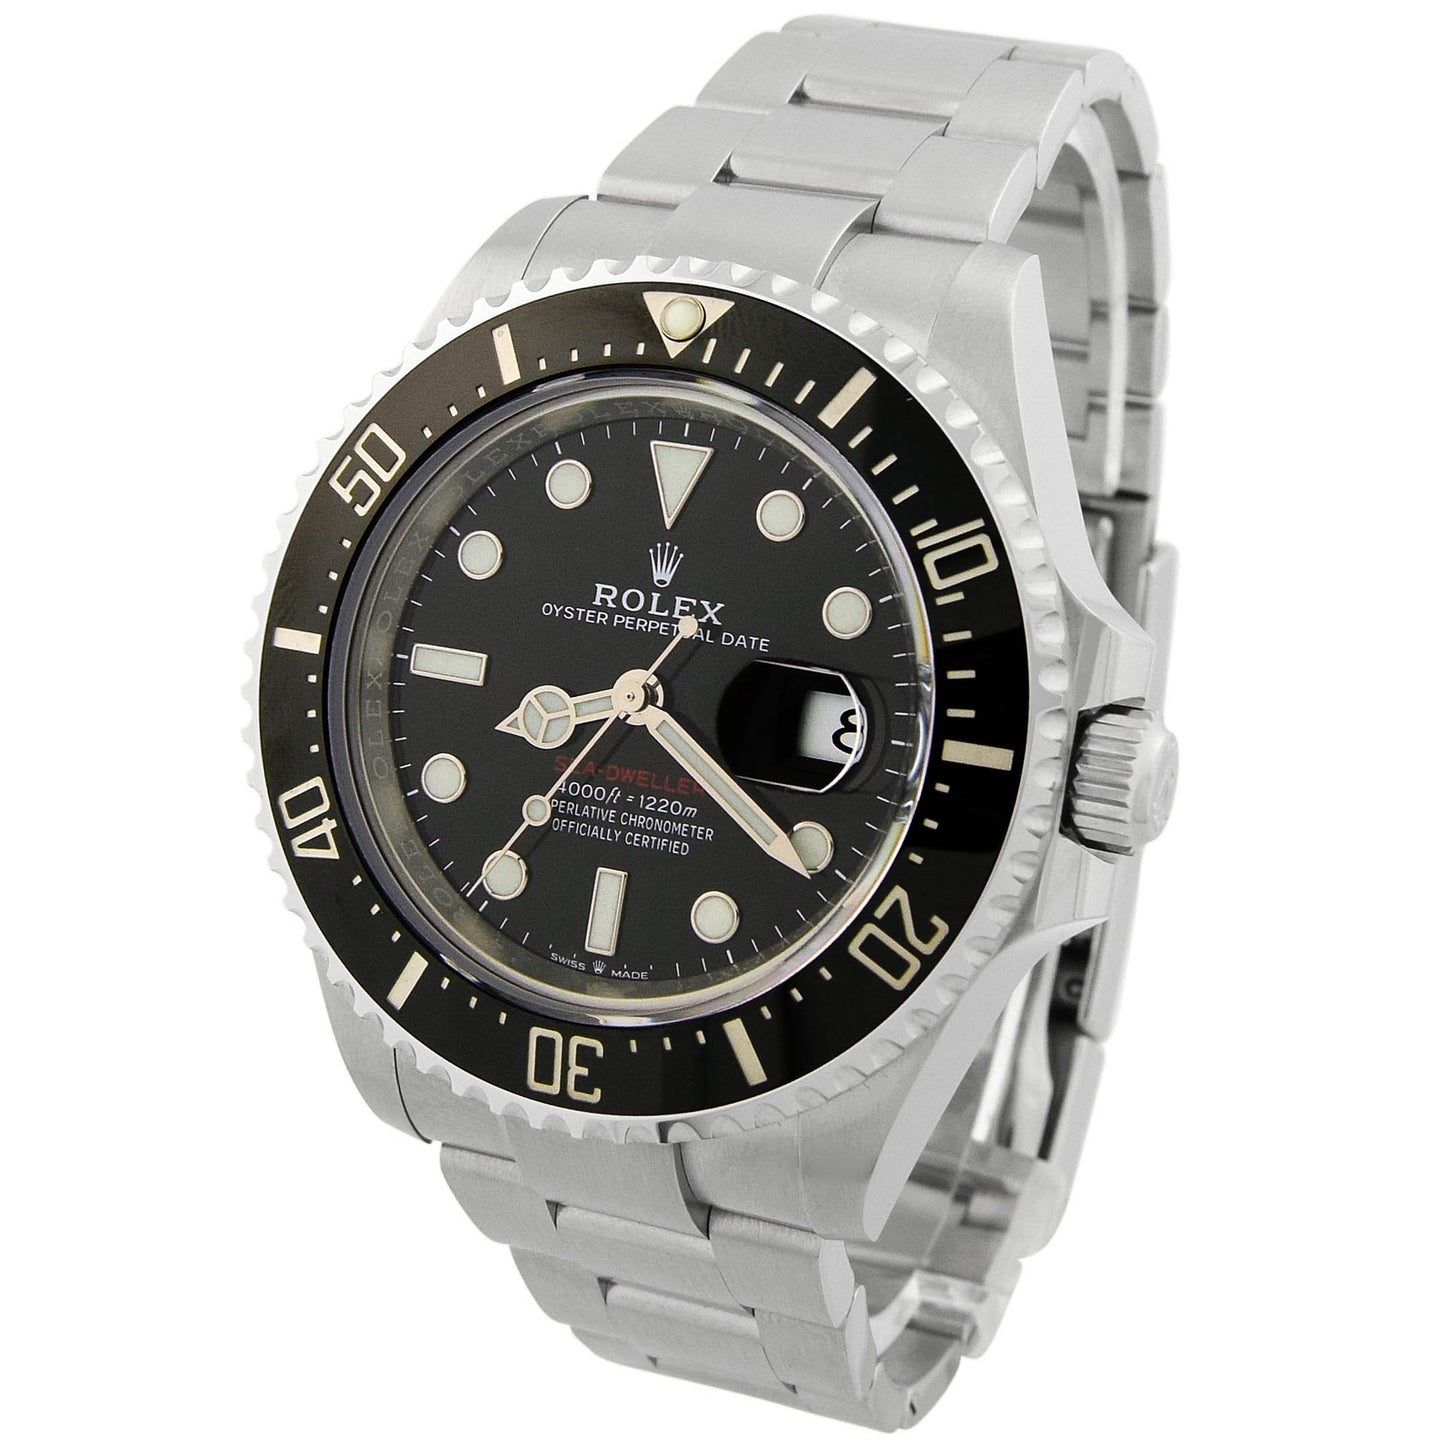 Rolex Seadweller "50th Anniversary" Stainless Steel 43mm Black Dot Dial Watch Reference# 126600 - Happy Jewelers Fine Jewelry Lifetime Warranty